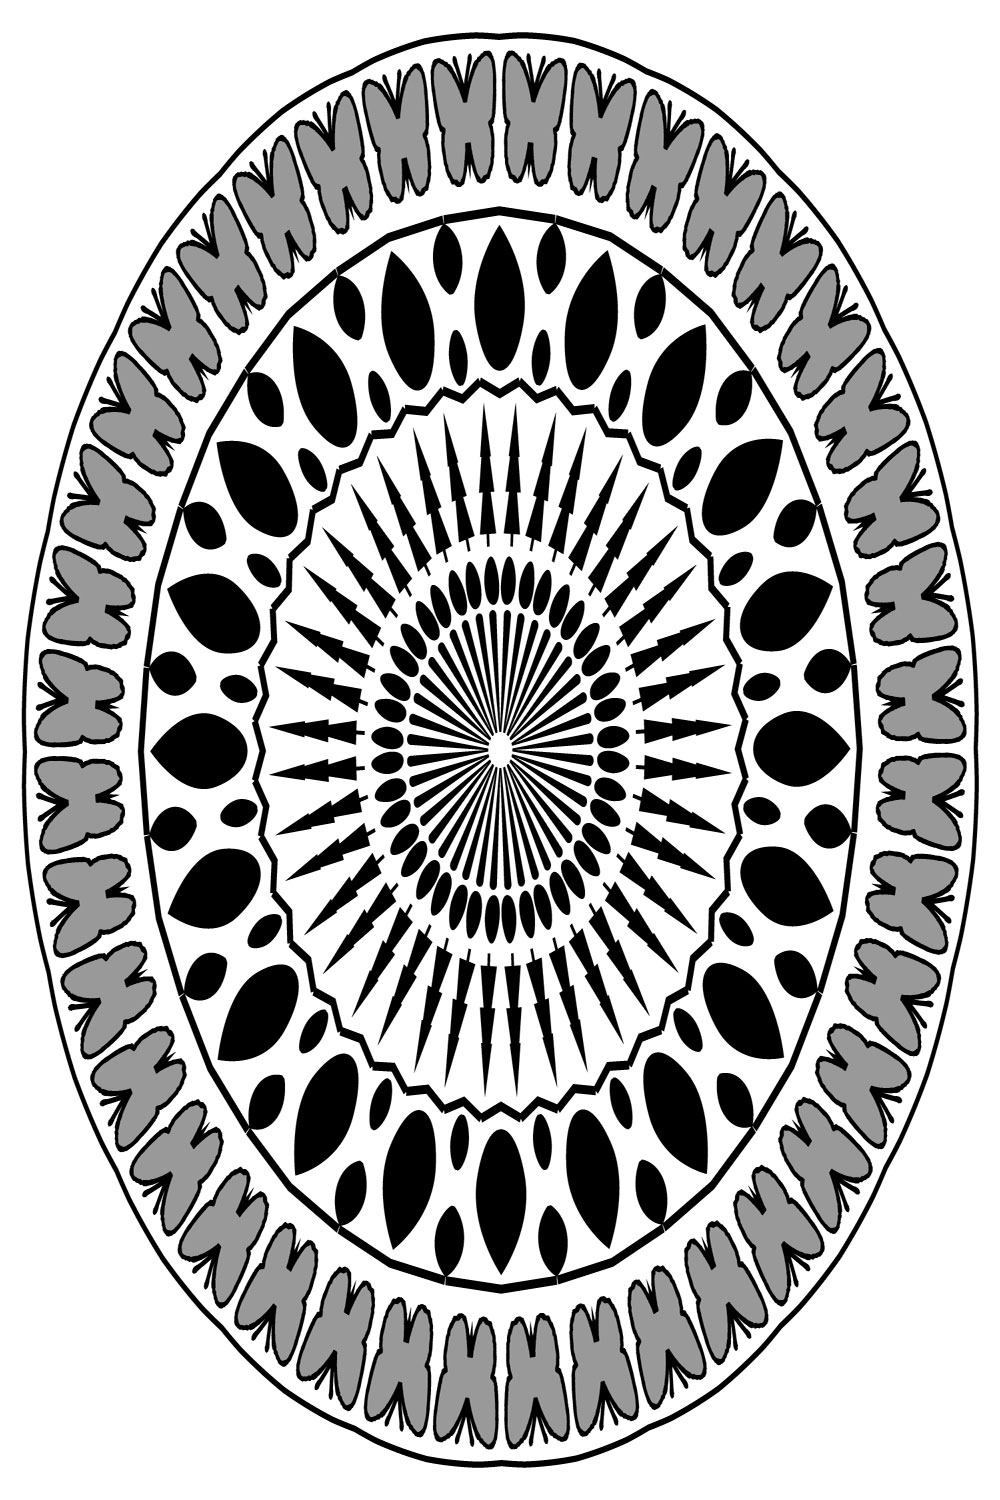 Mandala Art Butterfly with black and white pinterest preview image.